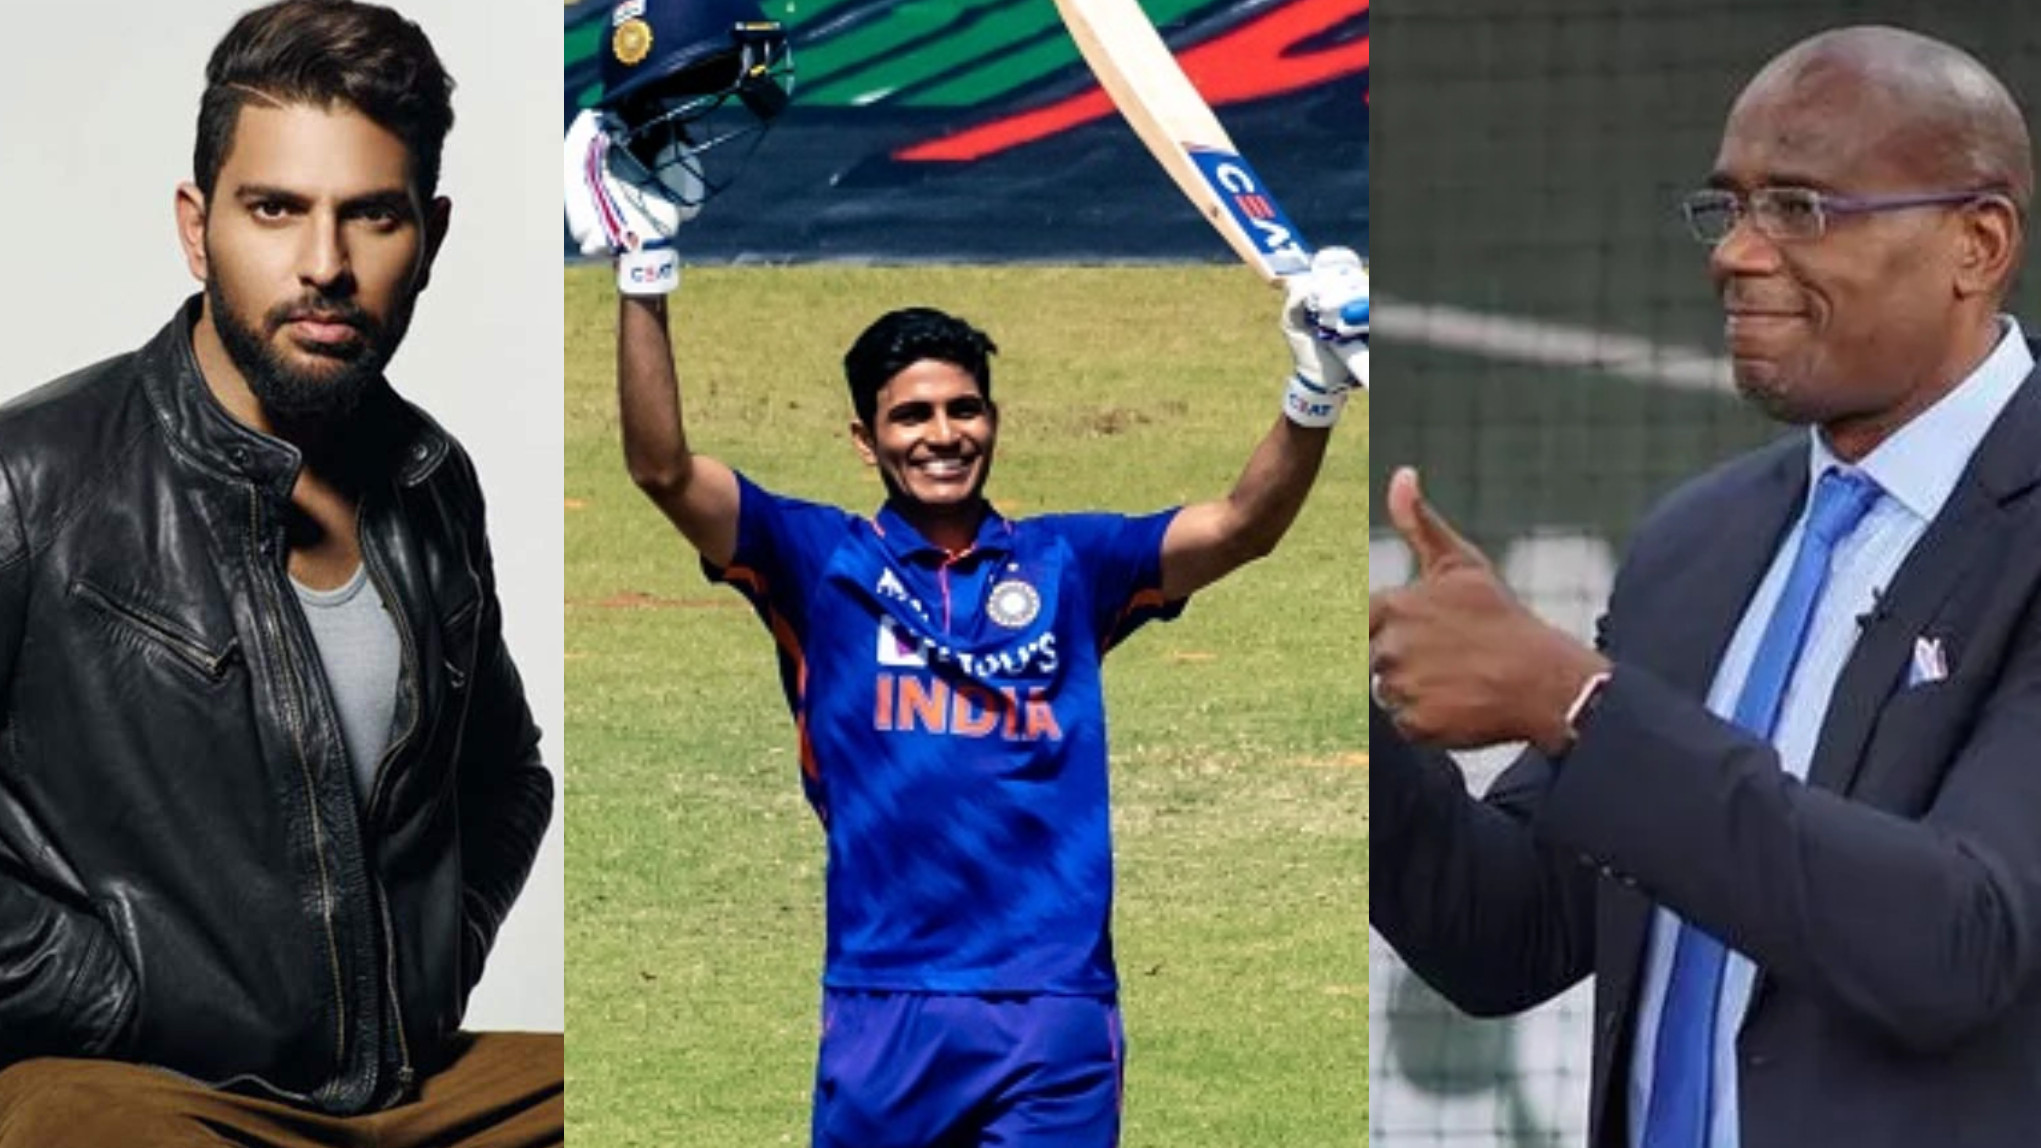 ZIM v IND 2022: Cricket fraternity lauds Shubman Gill for his maiden ODI ton; India makes 289/8